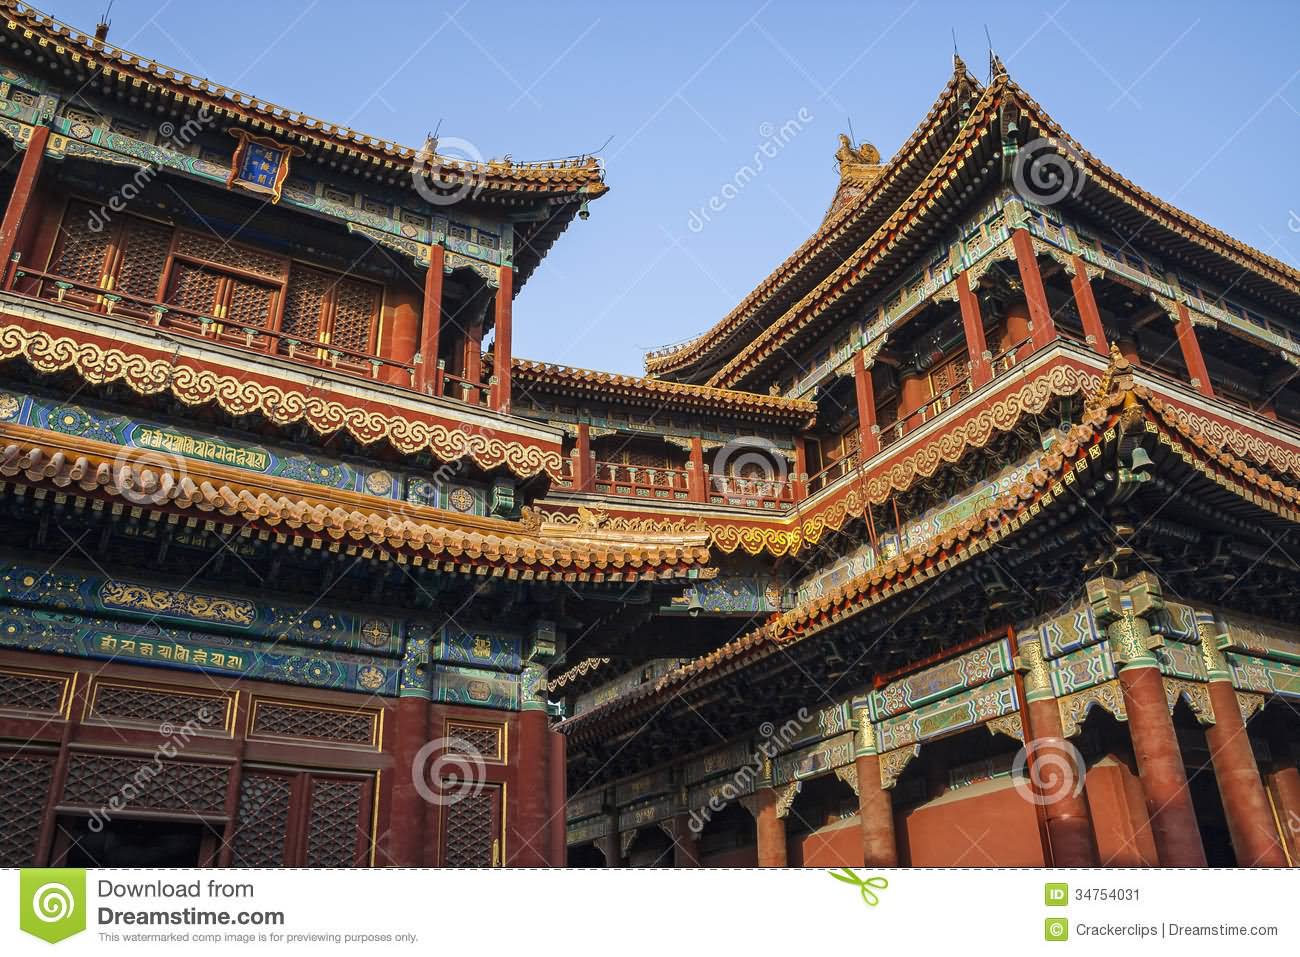 Yonghe Temple Or Lama Temple In China